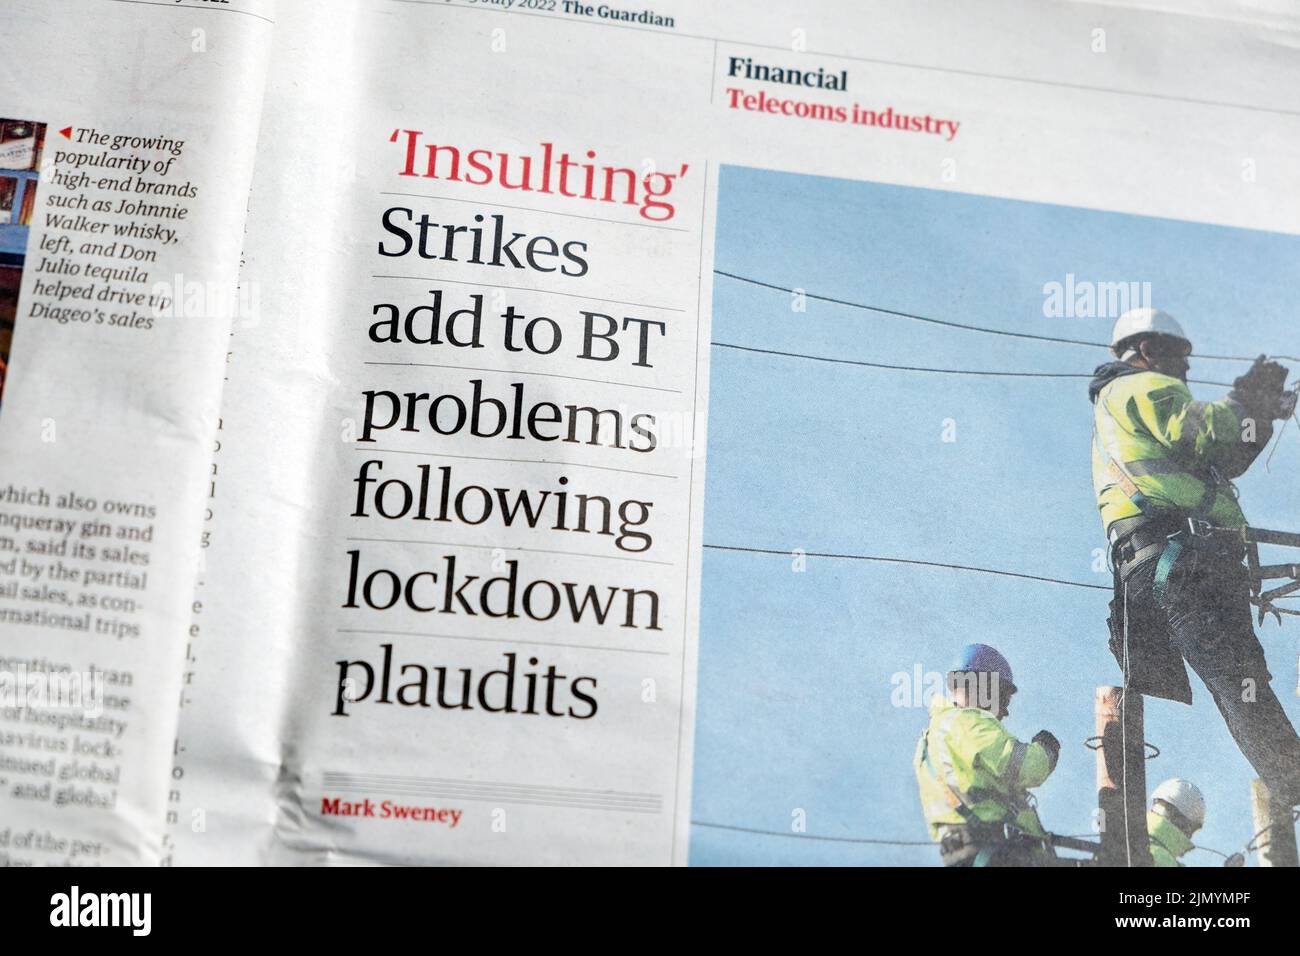 'Insulting' 'Strikes add to BT problems following lockdown plaudits' Guardian newspaper BT strike Financial article 29 July 2022 London England UK Stock Photo